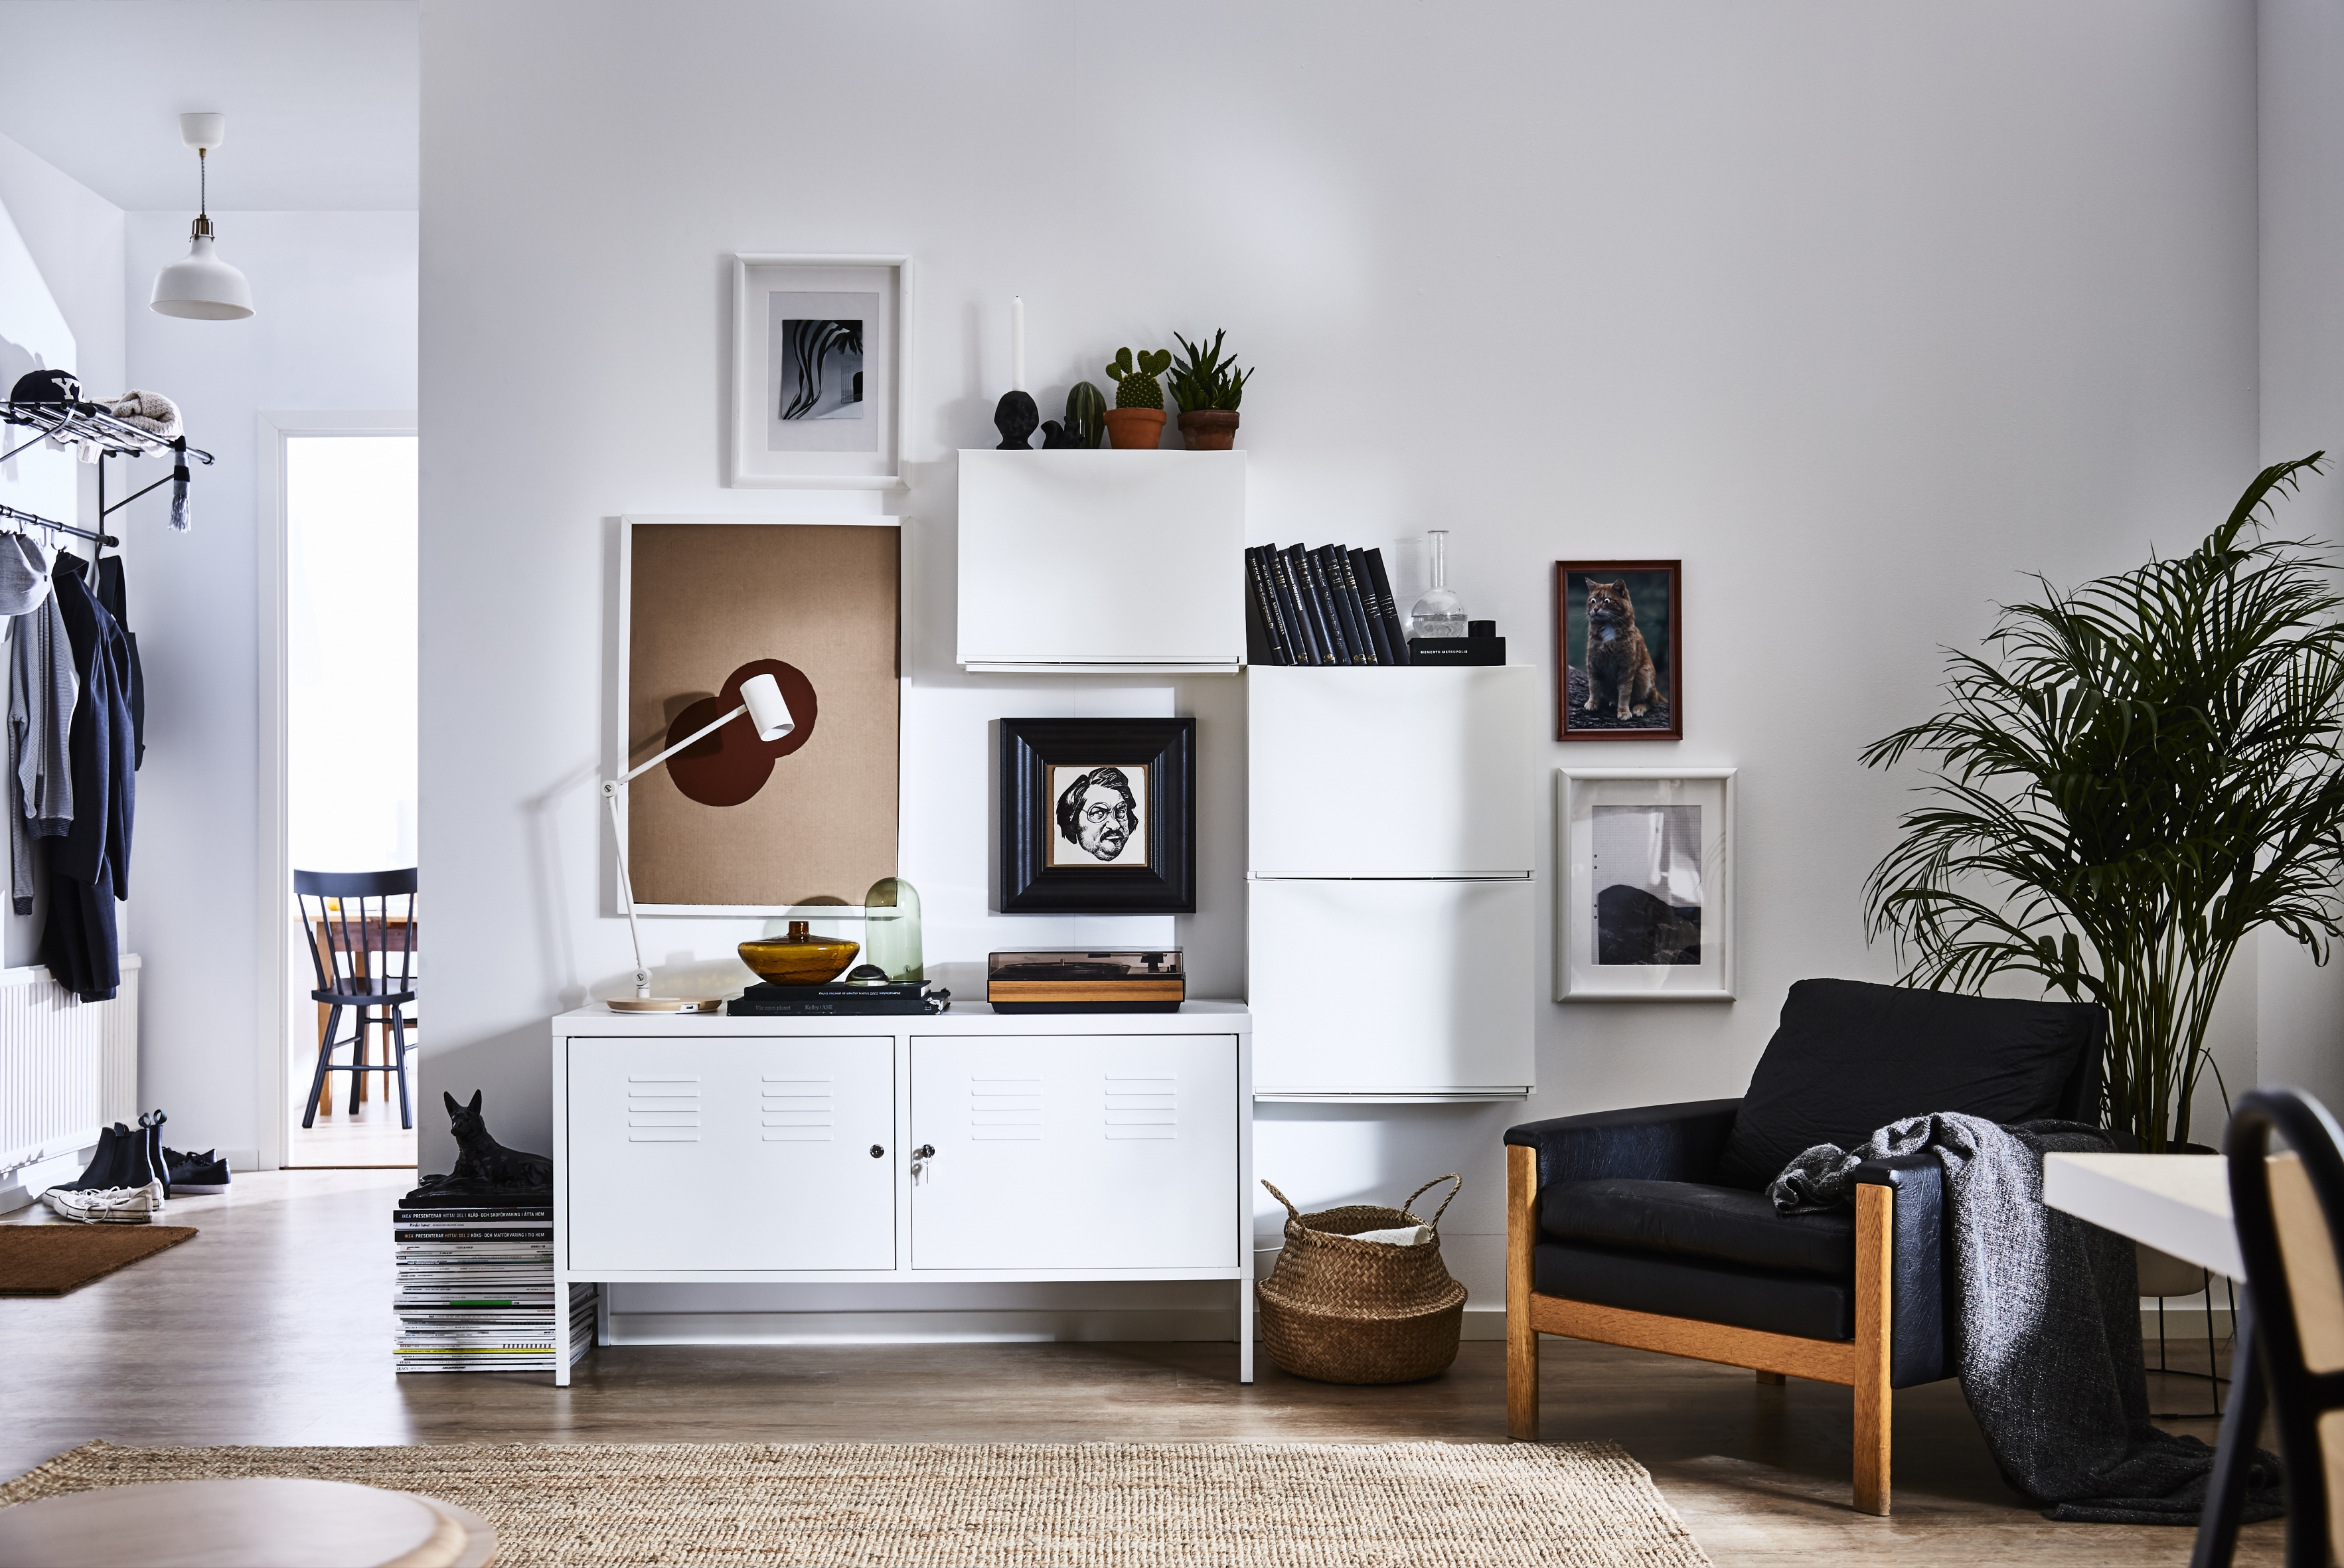 A modern white living room with storage by Ikea